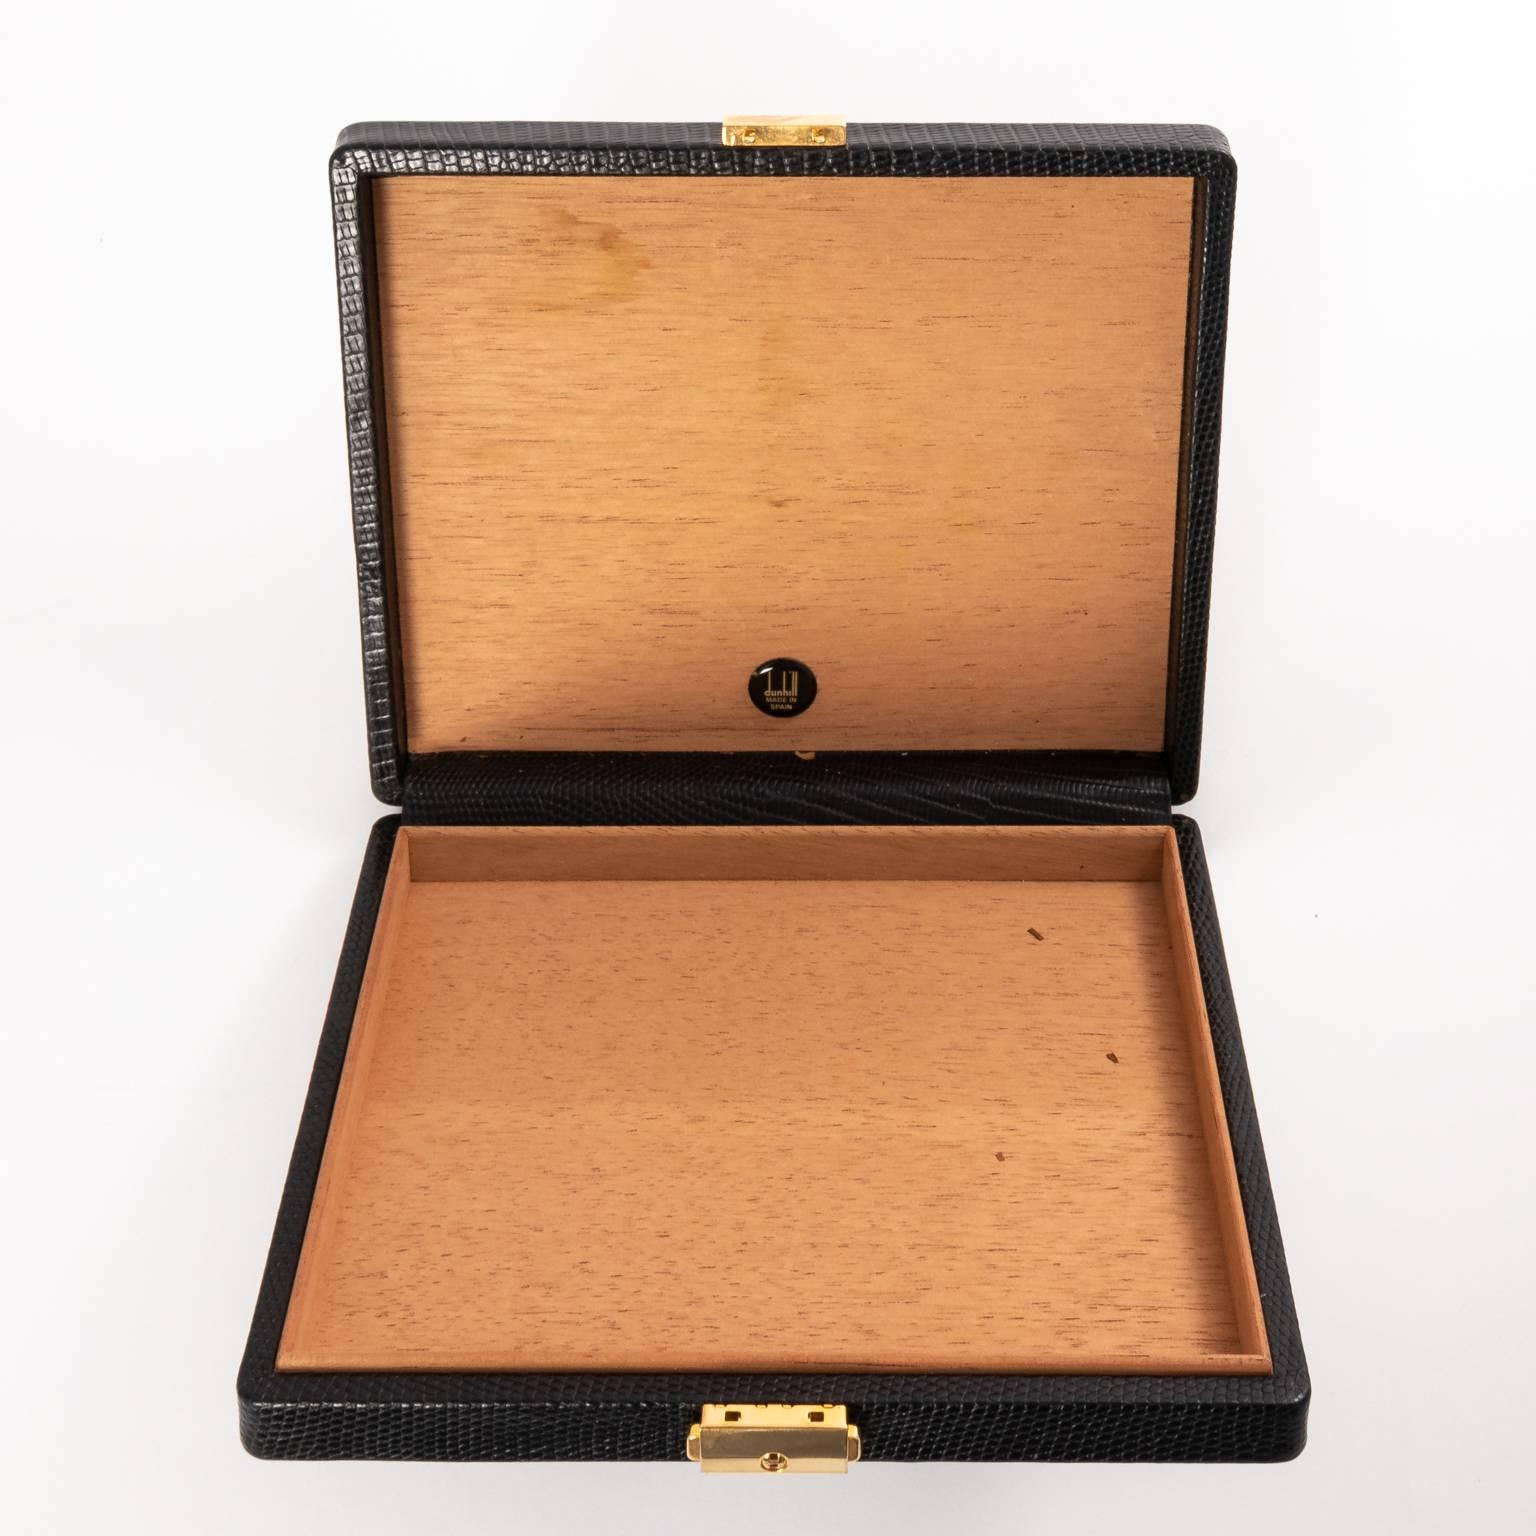 Dunhill travel cigar case in black leather with gold clasp, circa 1980s.
 